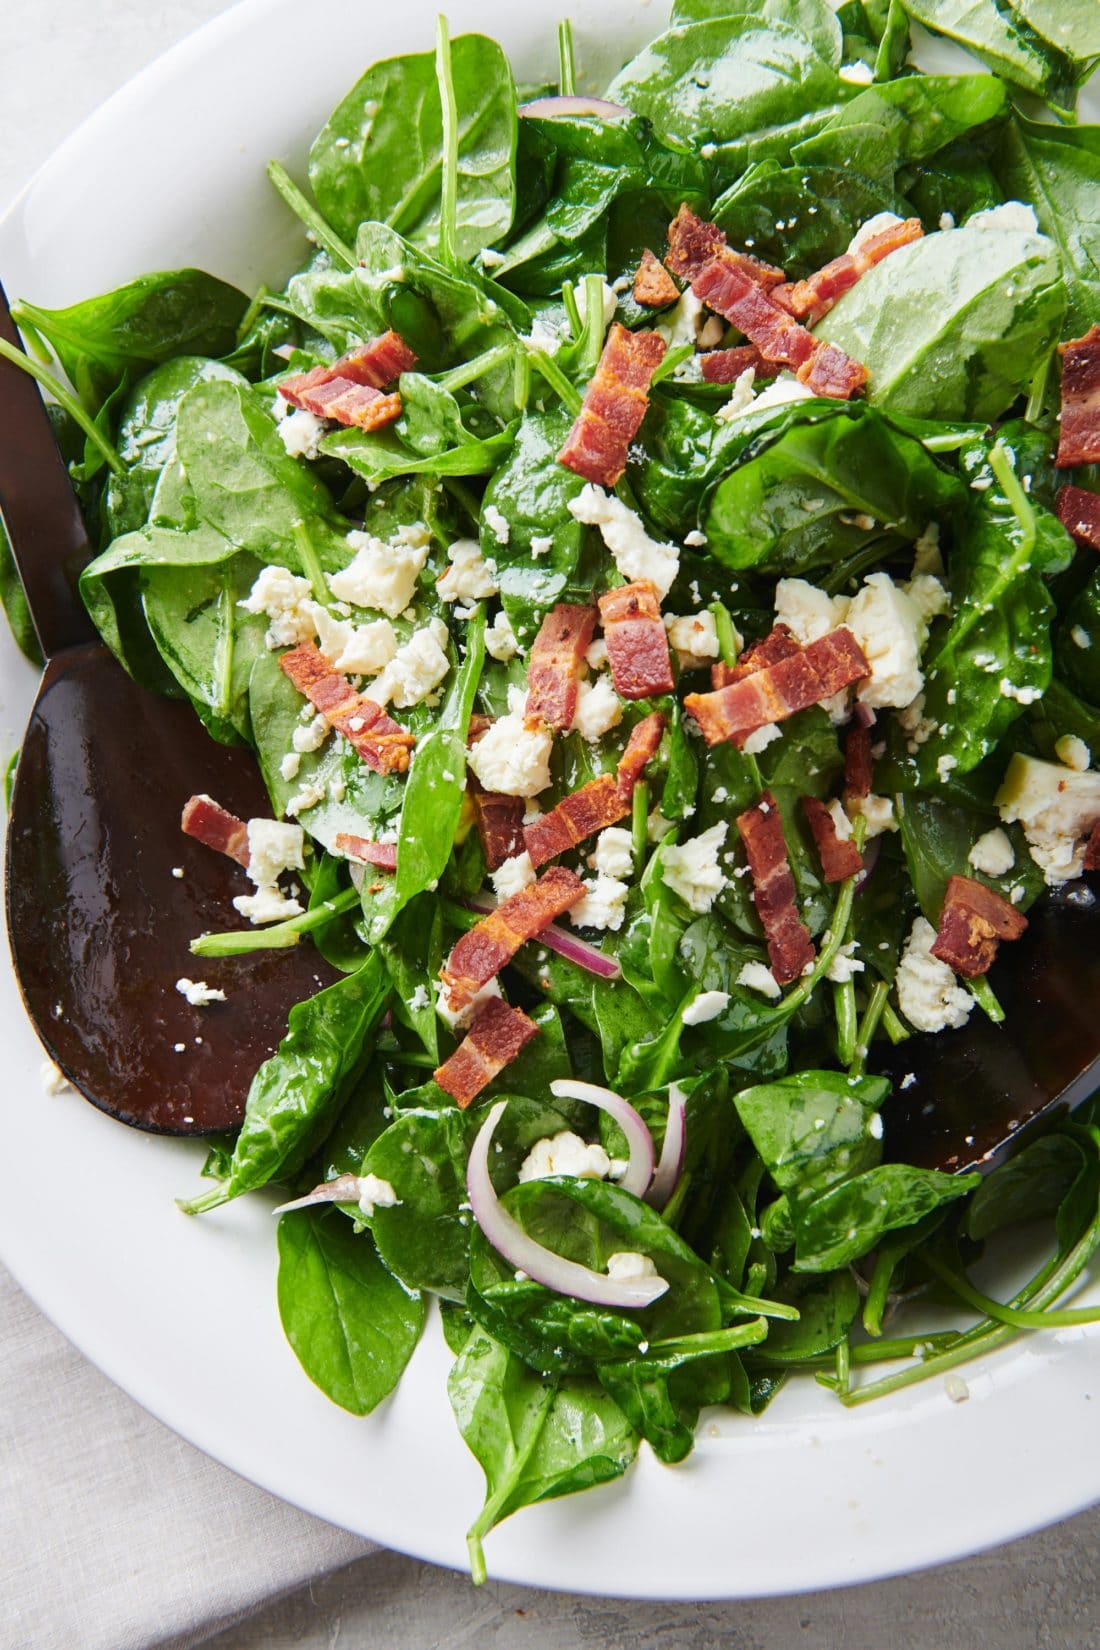 Spoon in a bowl of Spinach Salad with Bacon and Blue Cheese.